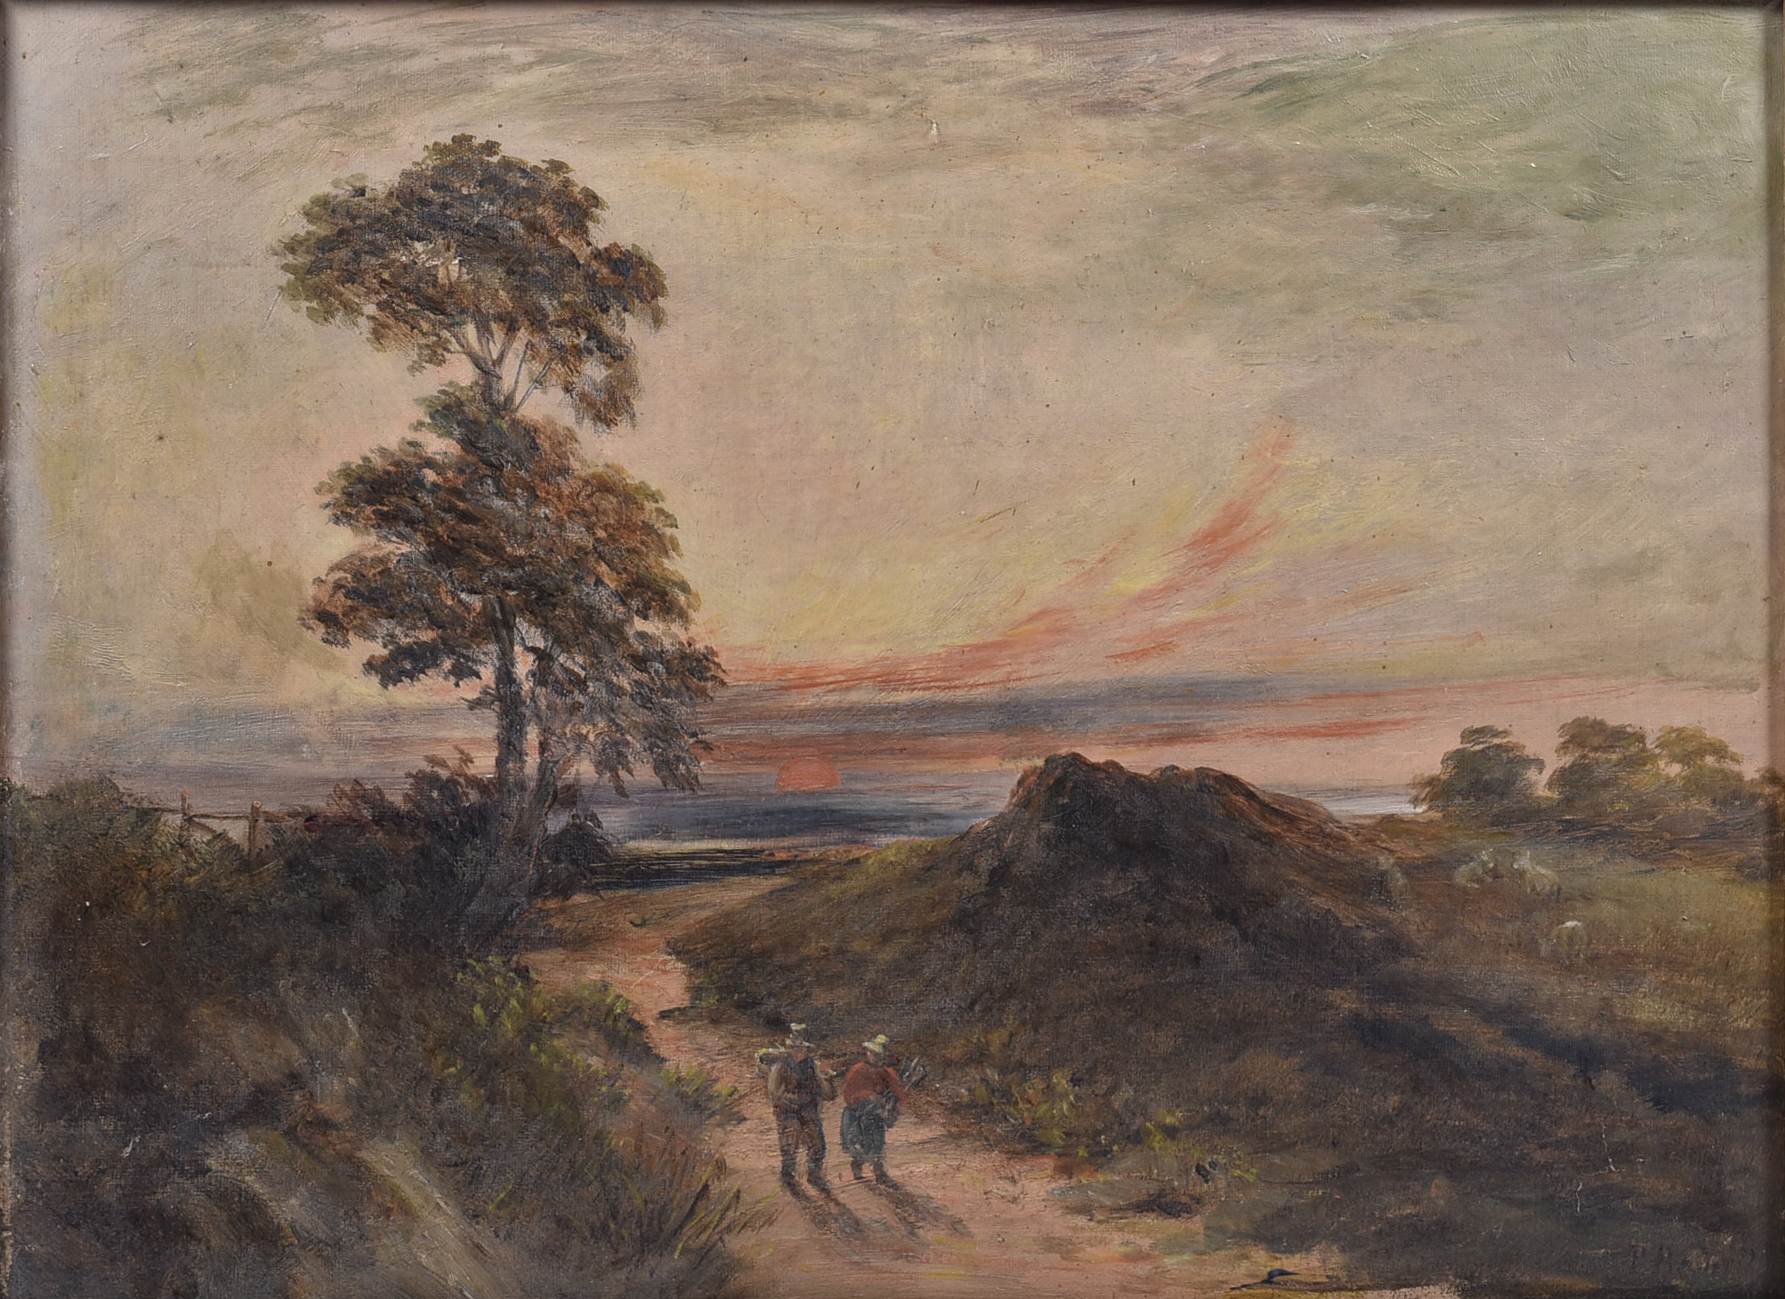 19th Century British School oil on canvas, 'Travellers on a Rural Road at Dusk', indistinctly signed